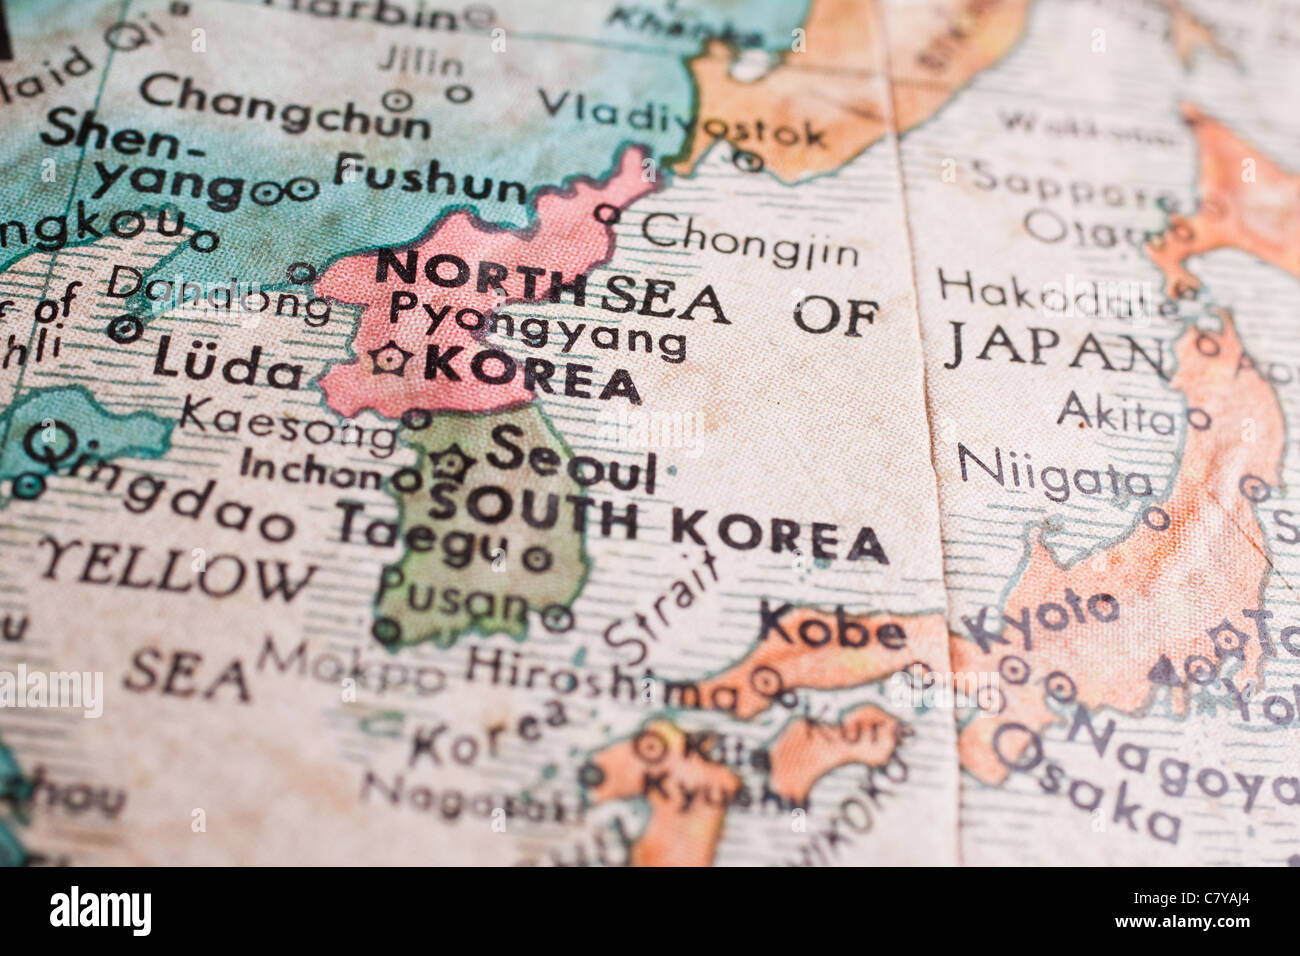 South and North Korea map Stock Photo